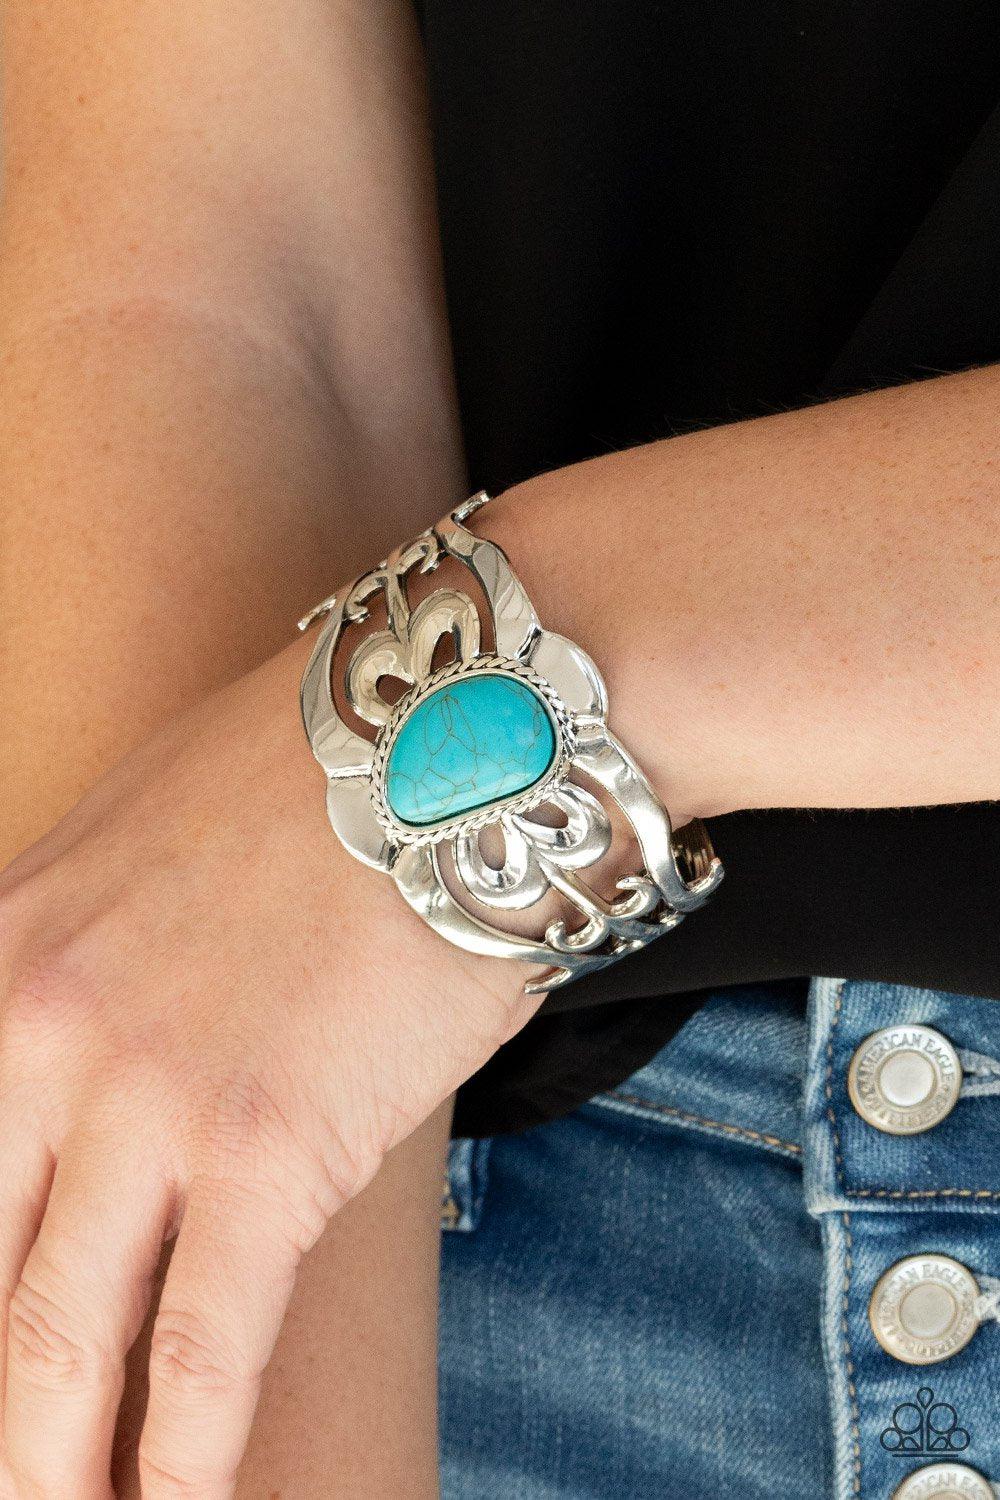 The MESAS are Calling Turquoise Blue Stone and Silver Cuff Bracelet - Paparazzi Accessories- model - CarasShop.com - $5 Jewelry by Cara Jewels